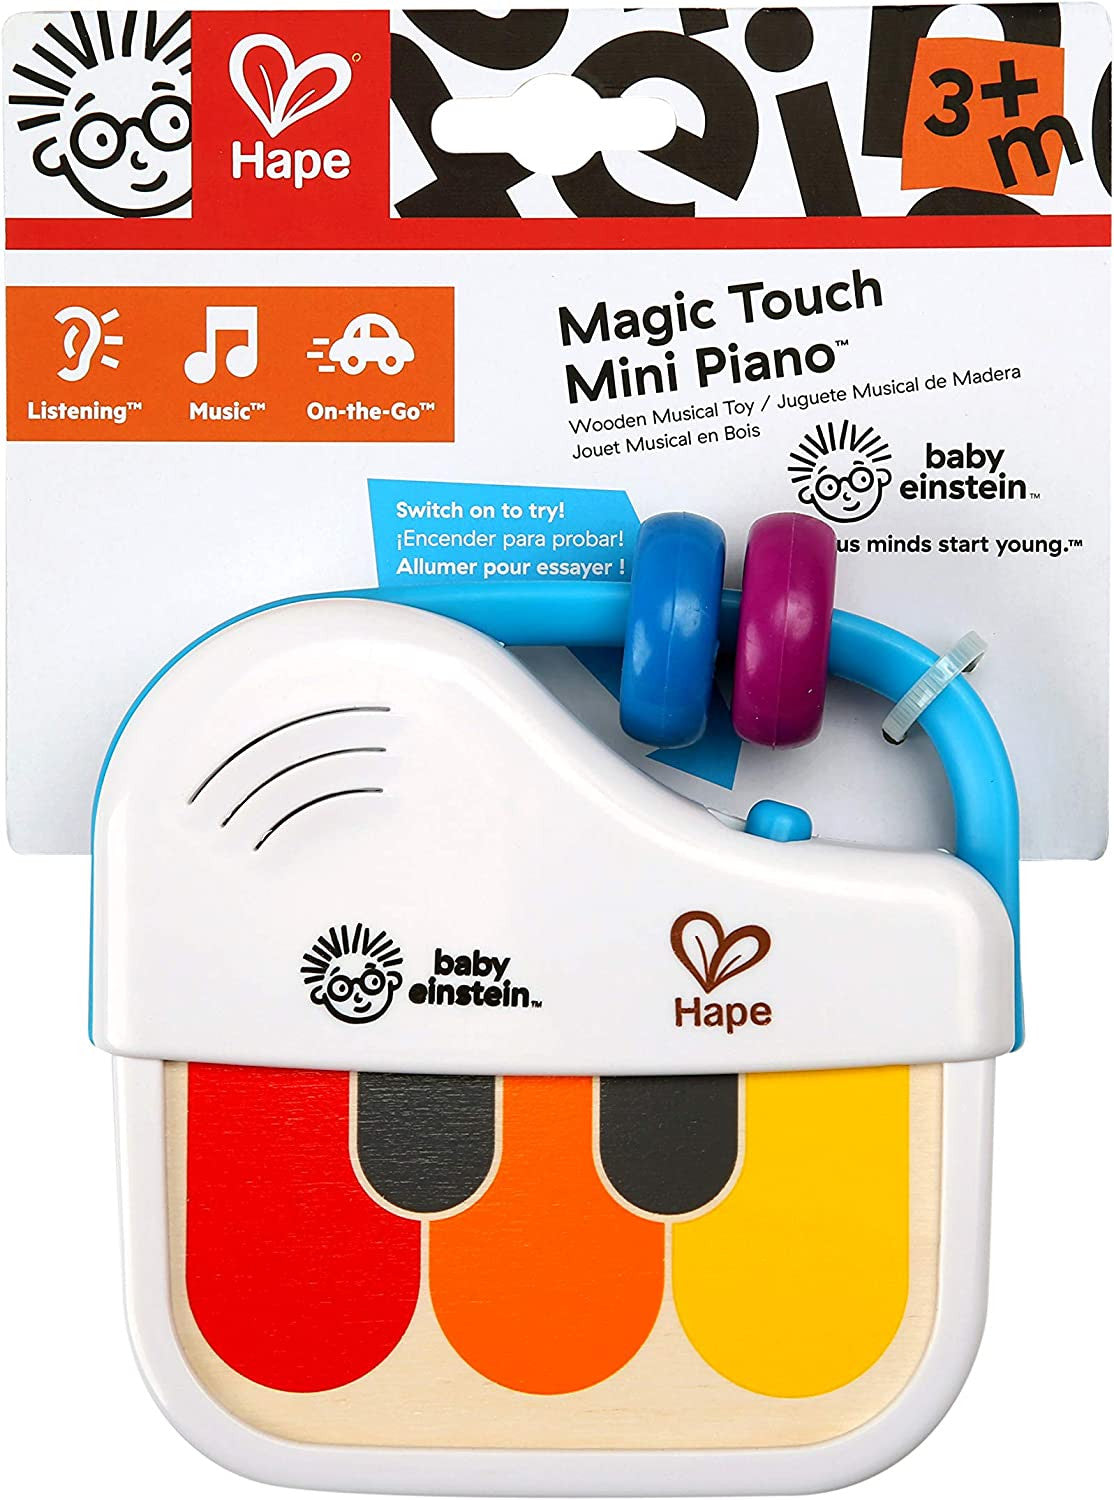 Hape Baby Einstein Magic Touch Mini Piano Wooden Musical Toy